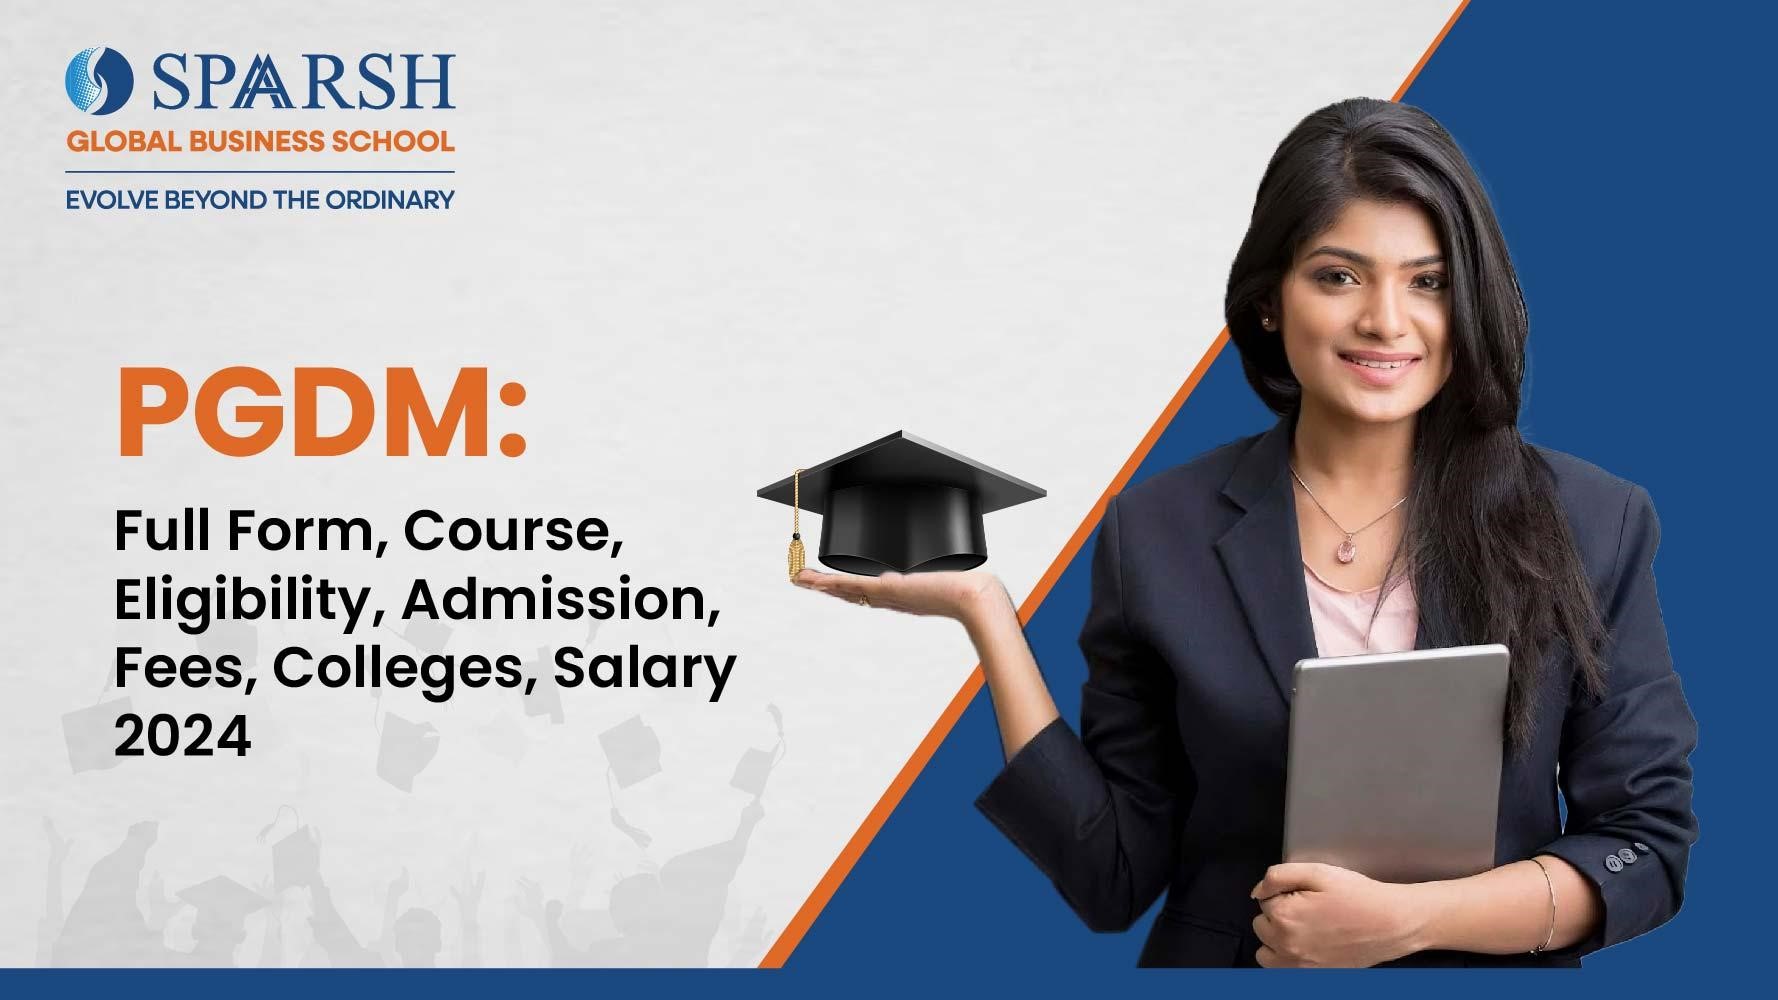 PGDM: Course, Eligibility, Admission, Fees, Colleges, Placement, Salary 2024